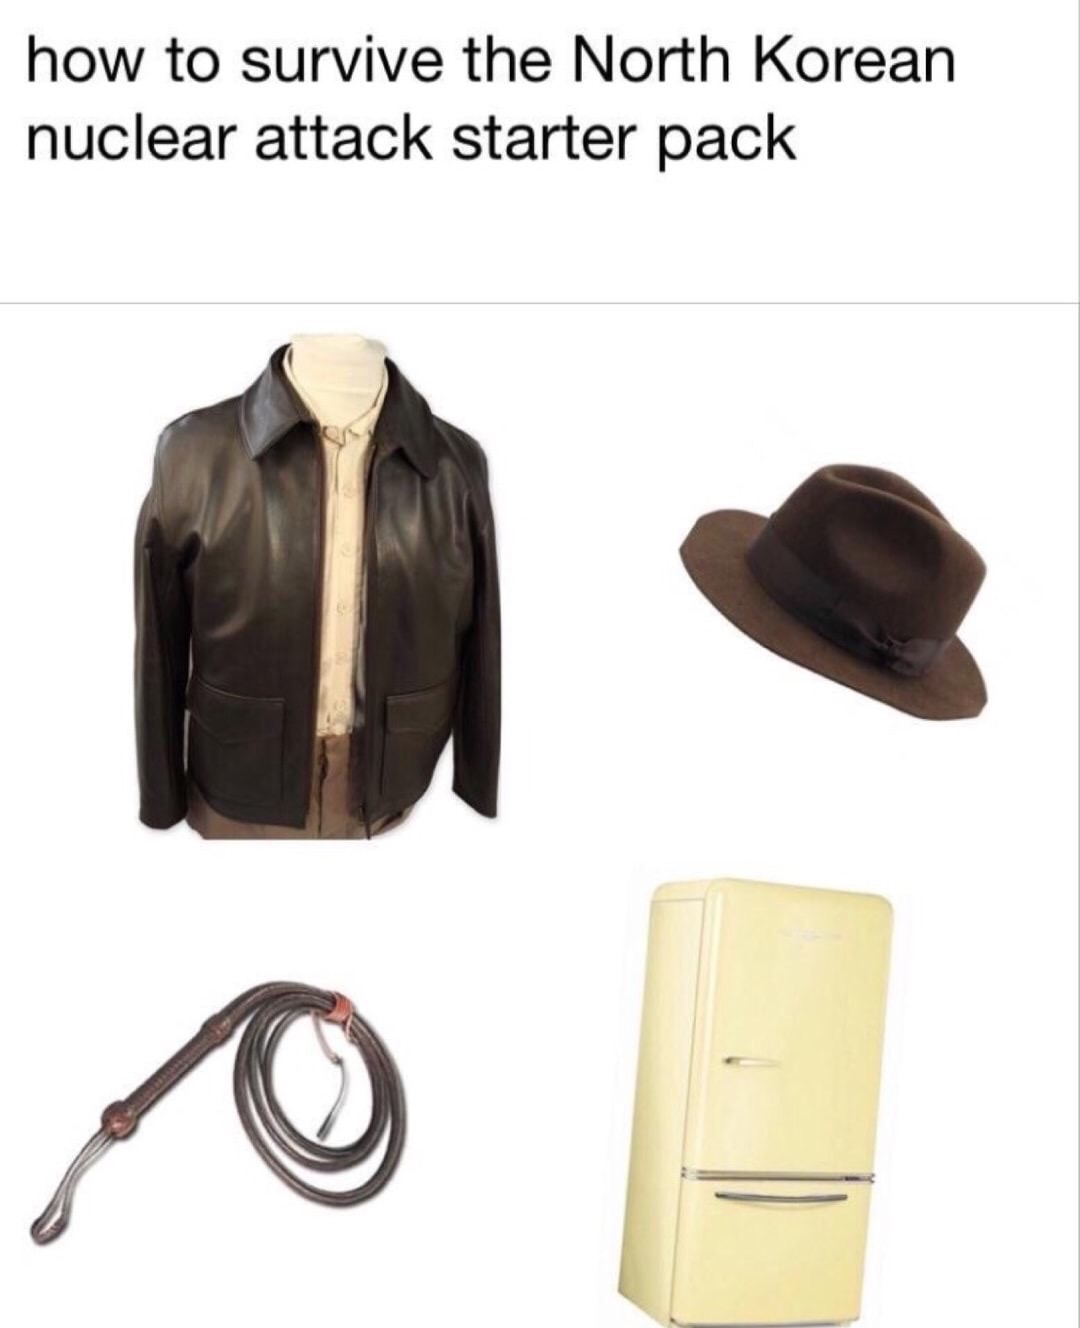 meme stream - leather - how to survive the North Korean nuclear attack starter pack